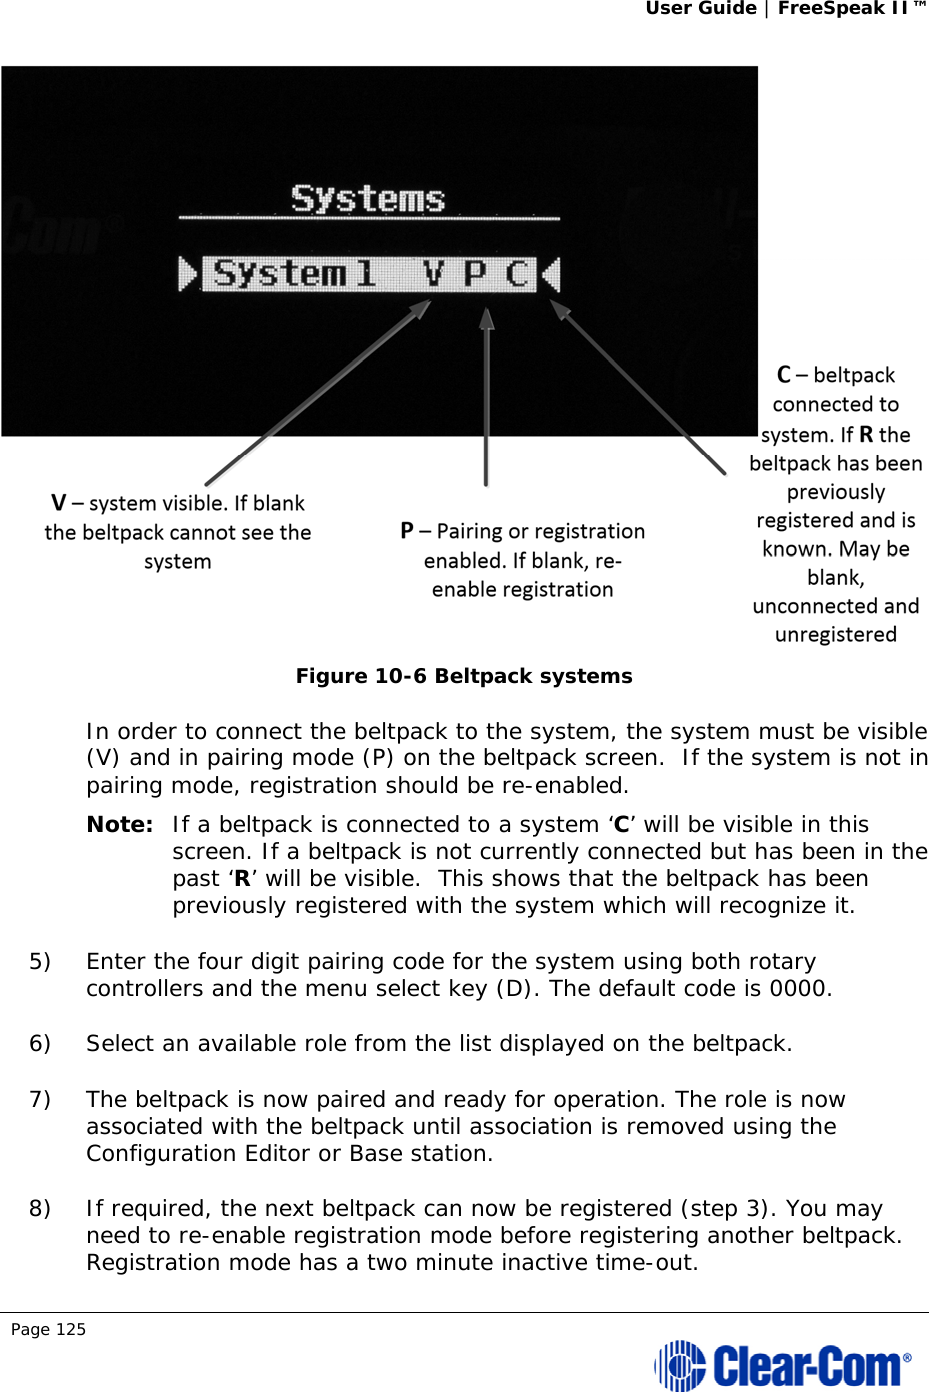 User Guide | FreeSpeak II™  Page 125   Figure 10-6 Beltpack systems In order to connect the beltpack to the system, the system must be visible (V) and in pairing mode (P) on the beltpack screen.  If the system is not in pairing mode, registration should be re-enabled.  Note: If a beltpack is connected to a system ‘C’ will be visible in this screen. If a beltpack is not currently connected but has been in the past ‘R’ will be visible.  This shows that the beltpack has been previously registered with the system which will recognize it.  5) Enter the four digit pairing code for the system using both rotary controllers and the menu select key (D). The default code is 0000.  6) Select an available role from the list displayed on the beltpack. 7) The beltpack is now paired and ready for operation. The role is now associated with the beltpack until association is removed using the Configuration Editor or Base station. 8) If required, the next beltpack can now be registered (step 3). You may need to re-enable registration mode before registering another beltpack. Registration mode has a two minute inactive time-out.  